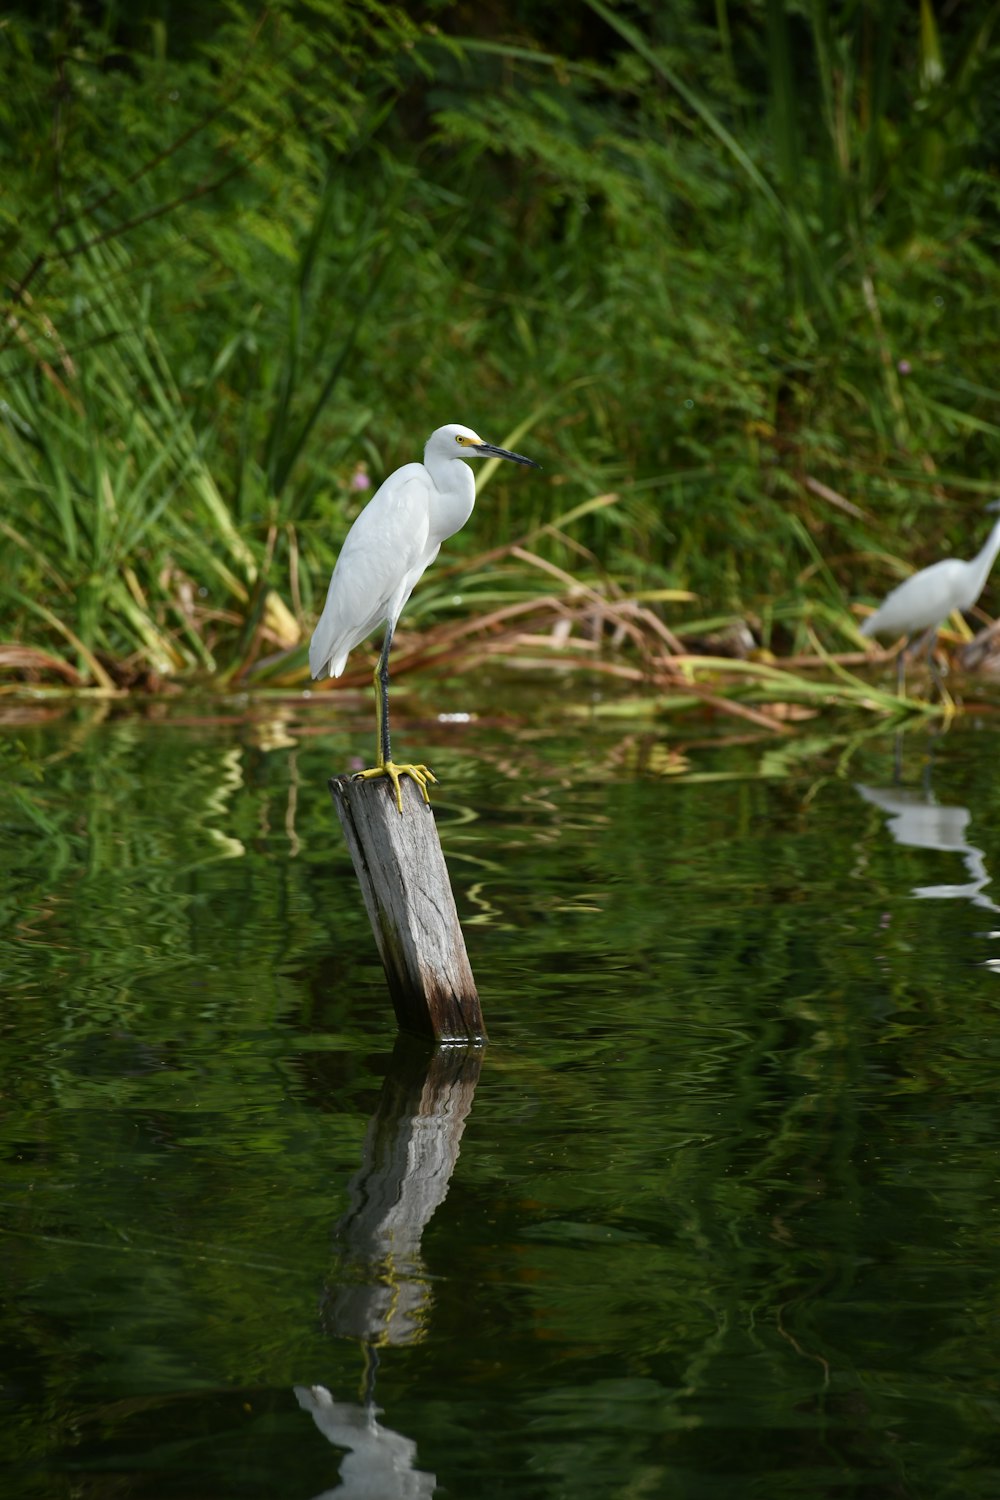 a white bird is standing on a log in the water